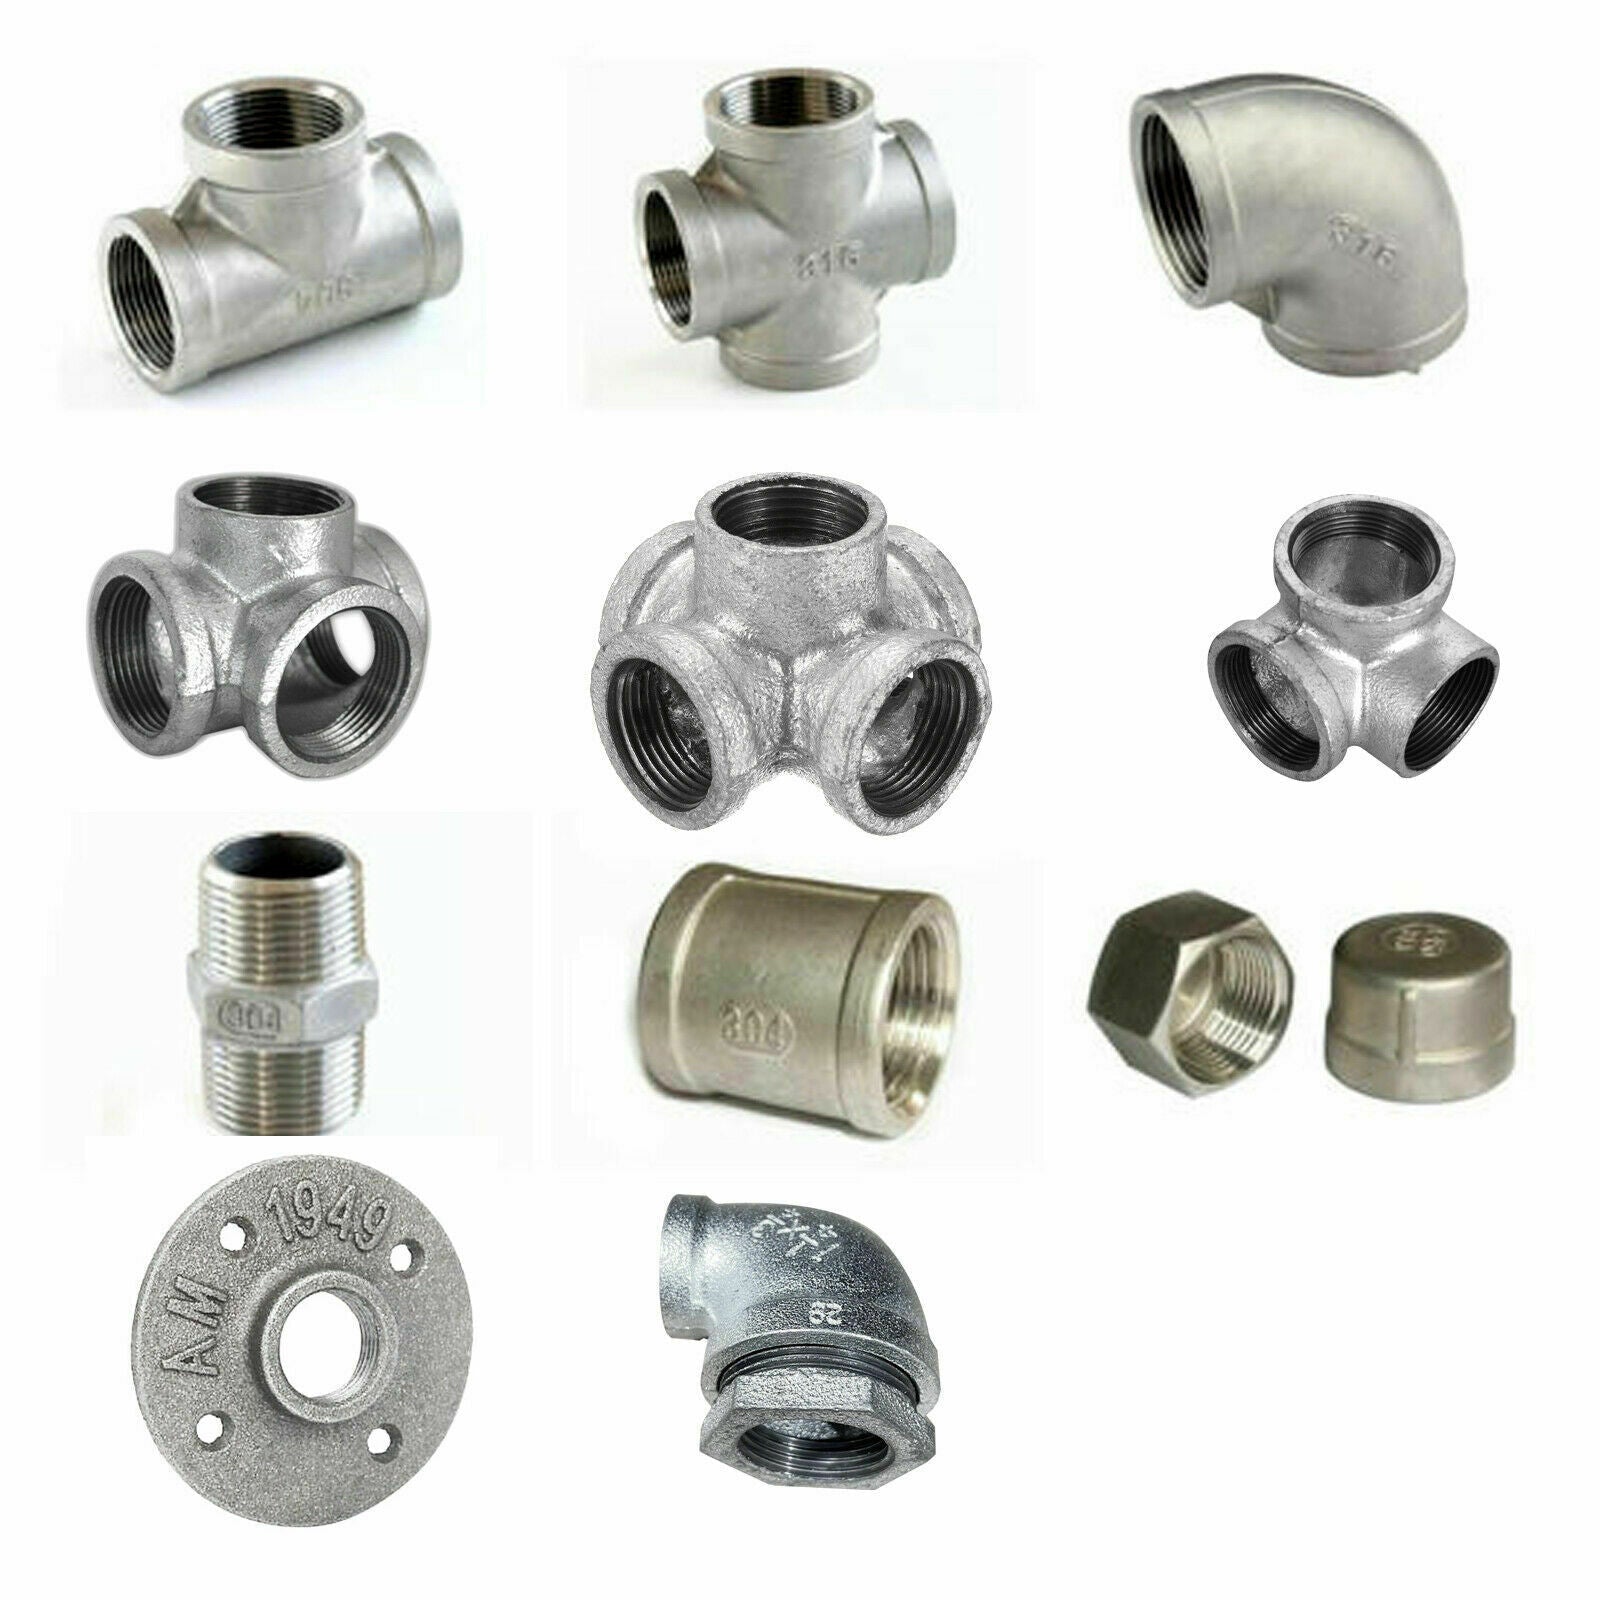 GALVANISED MALLEABLE IRON PIPE FITTINGS